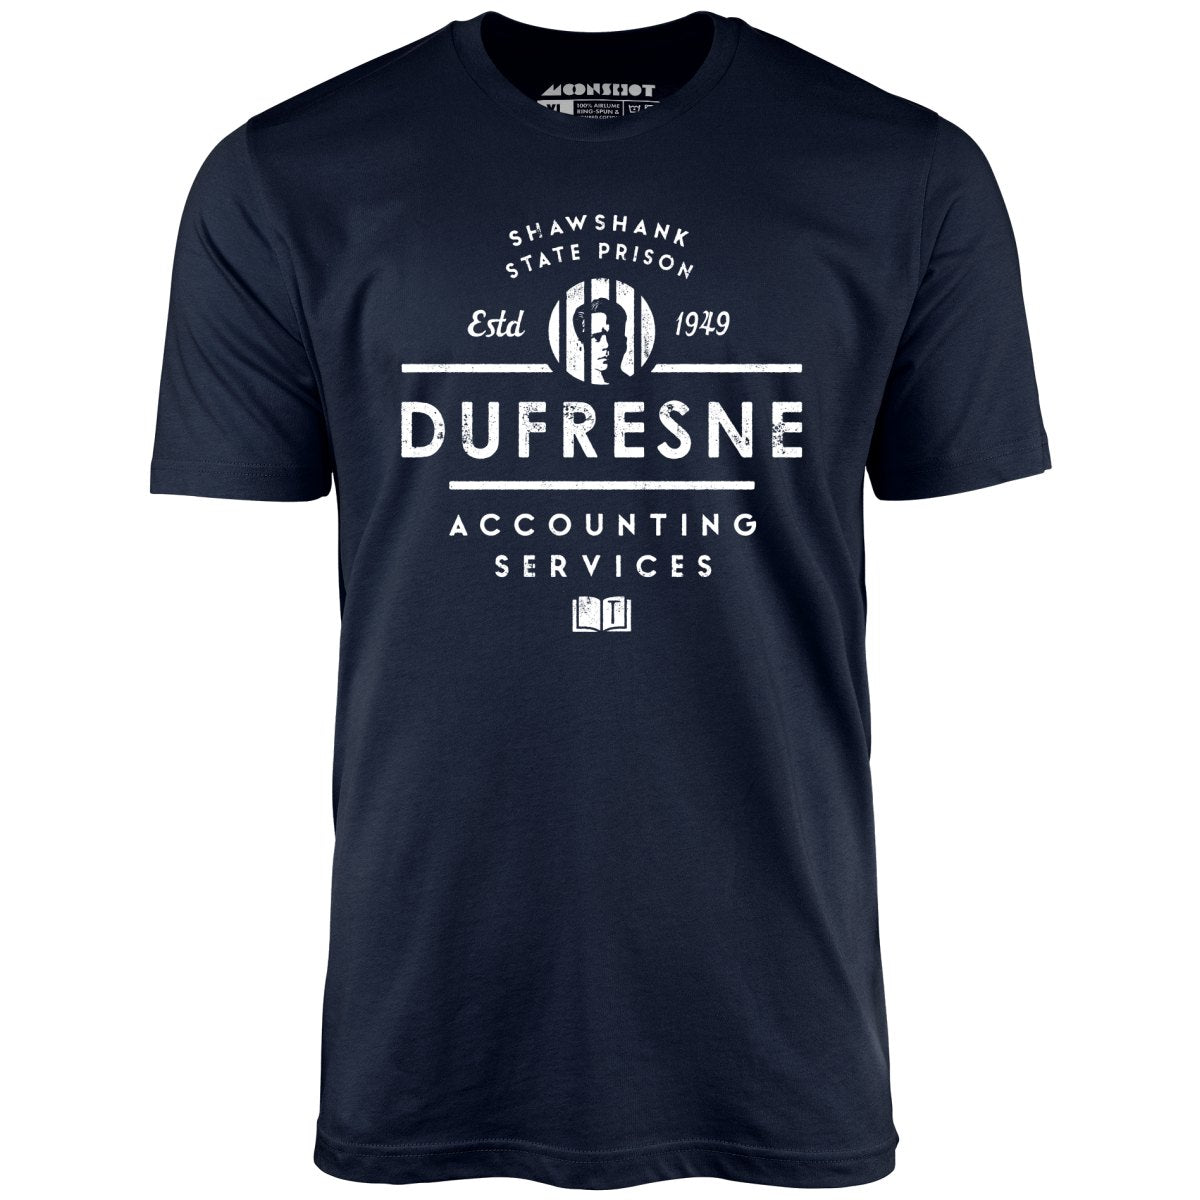 Dufresne Accounting Services - Unisex T-Shirt